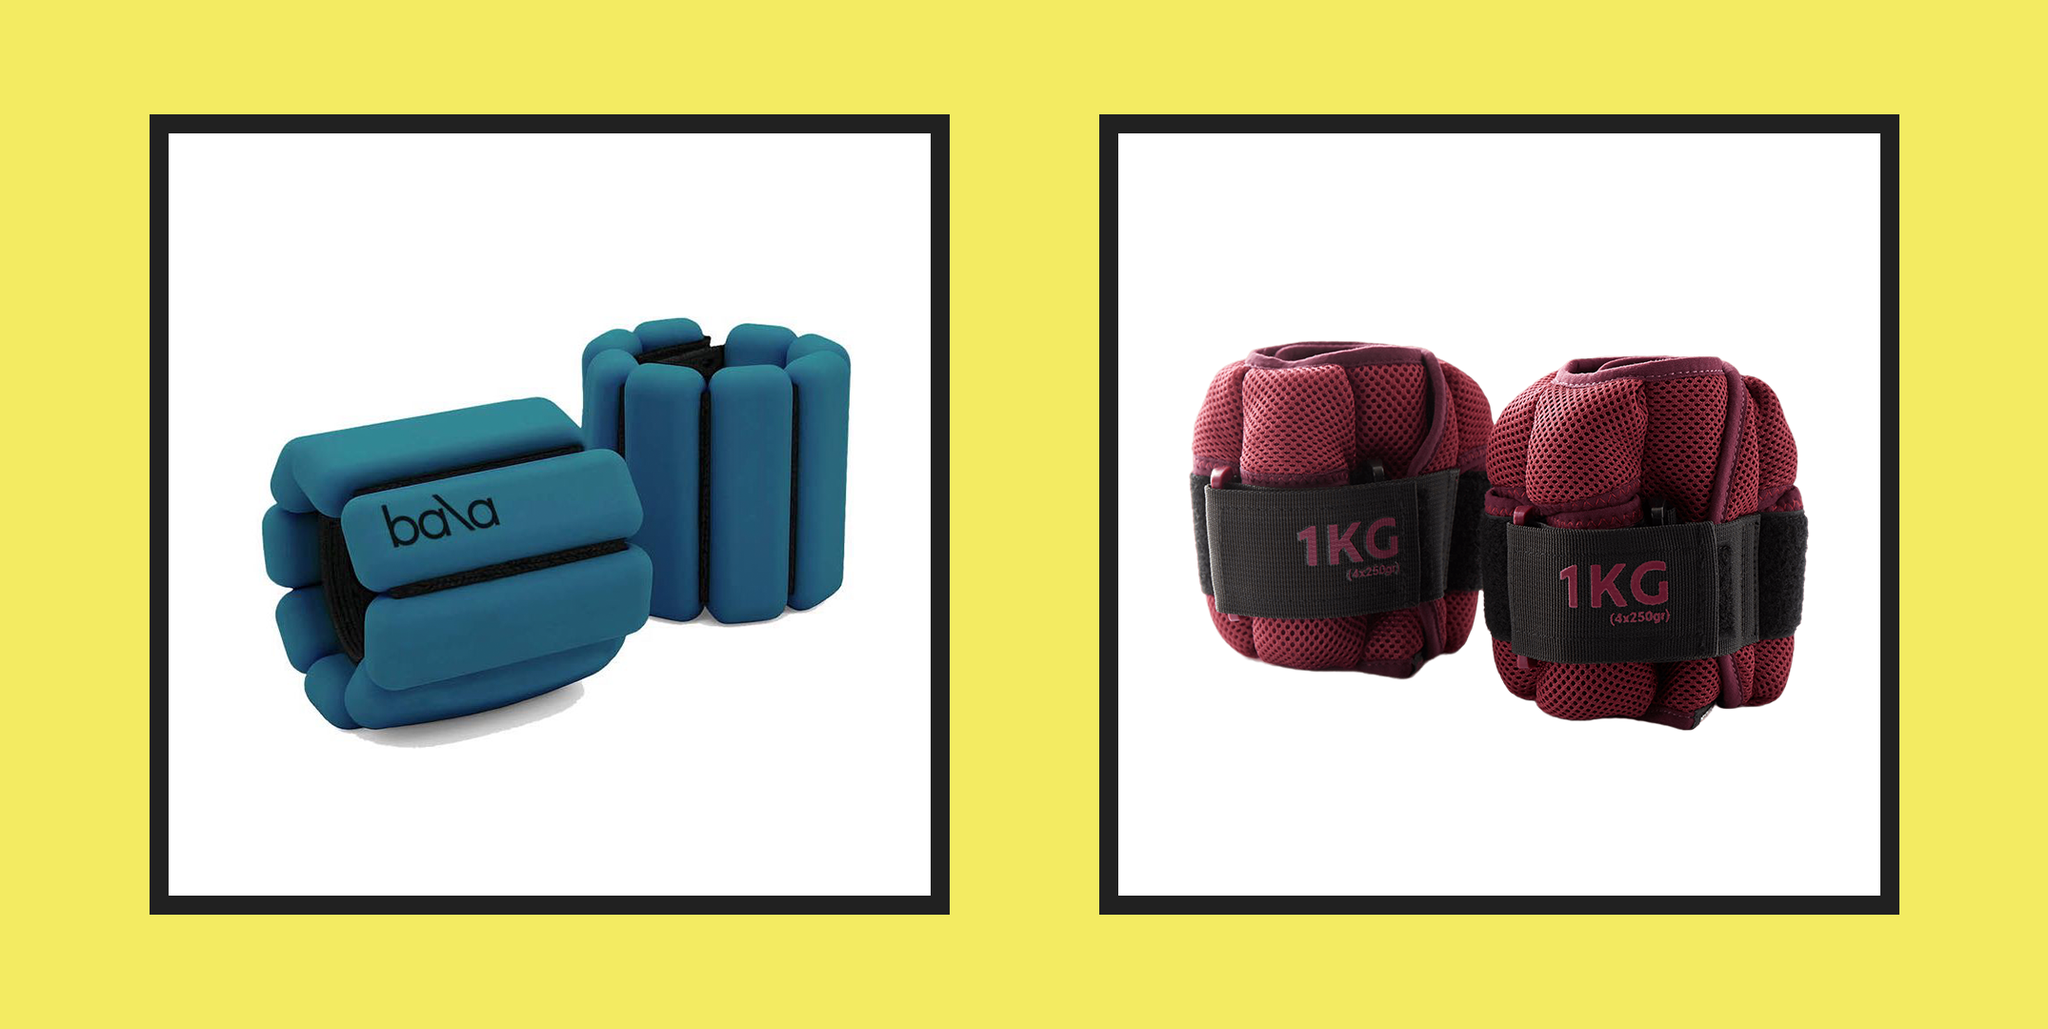 Do ankle weights really need to be smart? We tested some to find out.